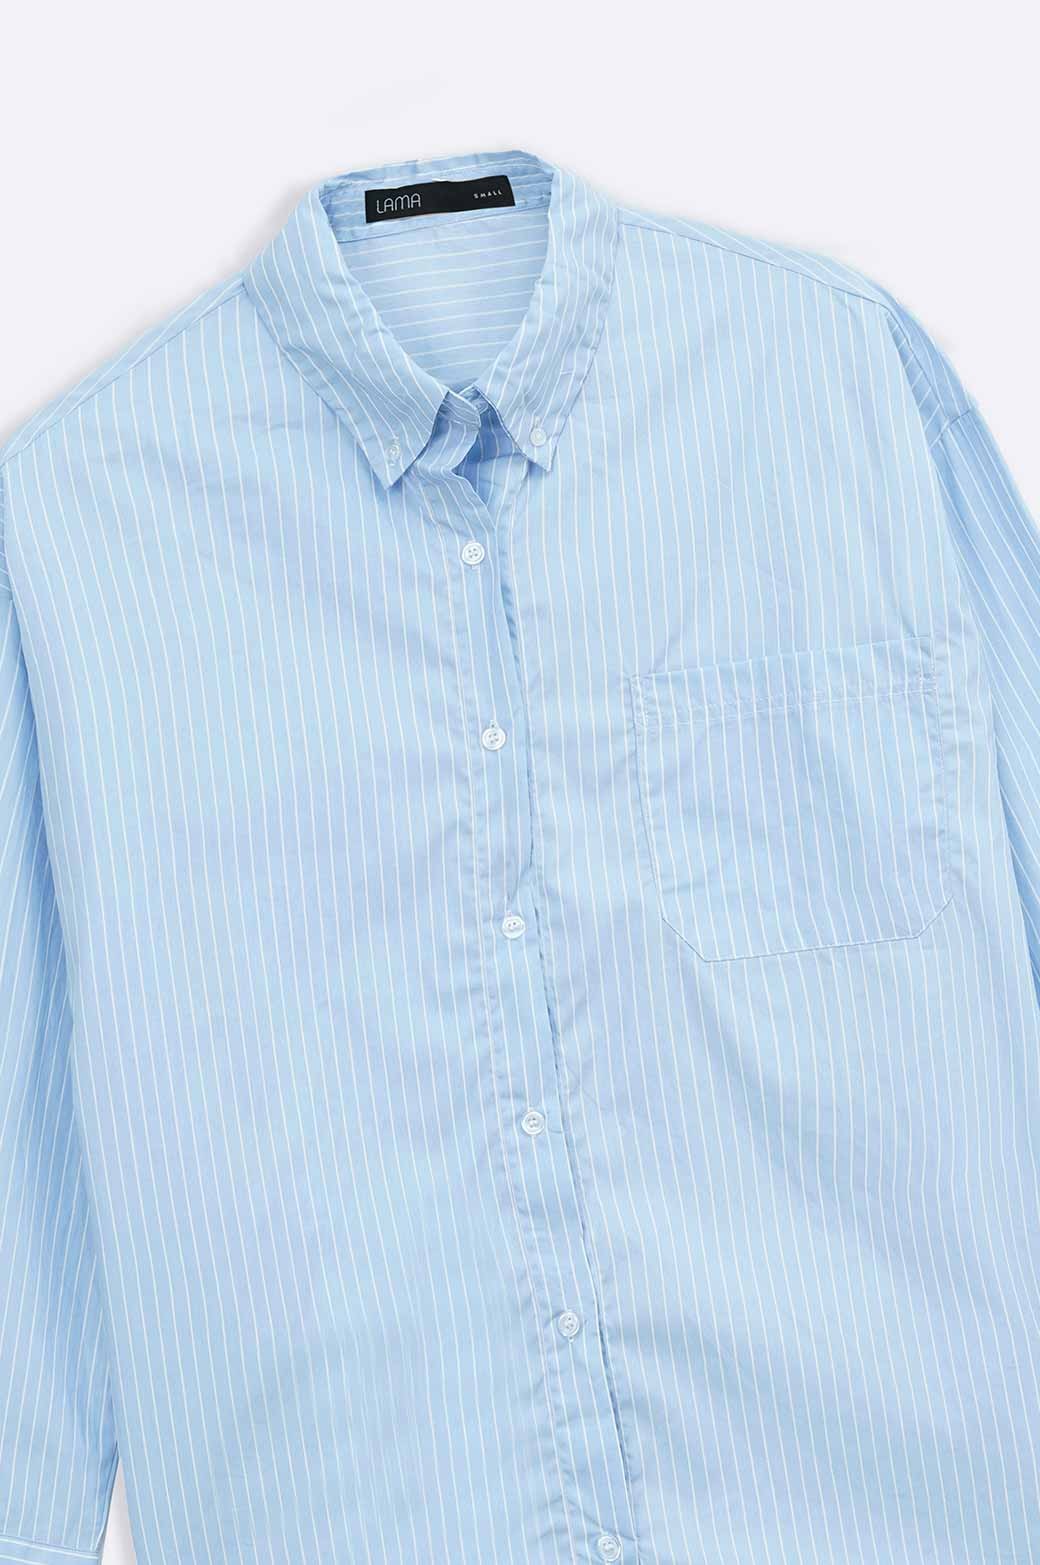 BLUE OVERSIZED STRIPED BUTTON DOWN